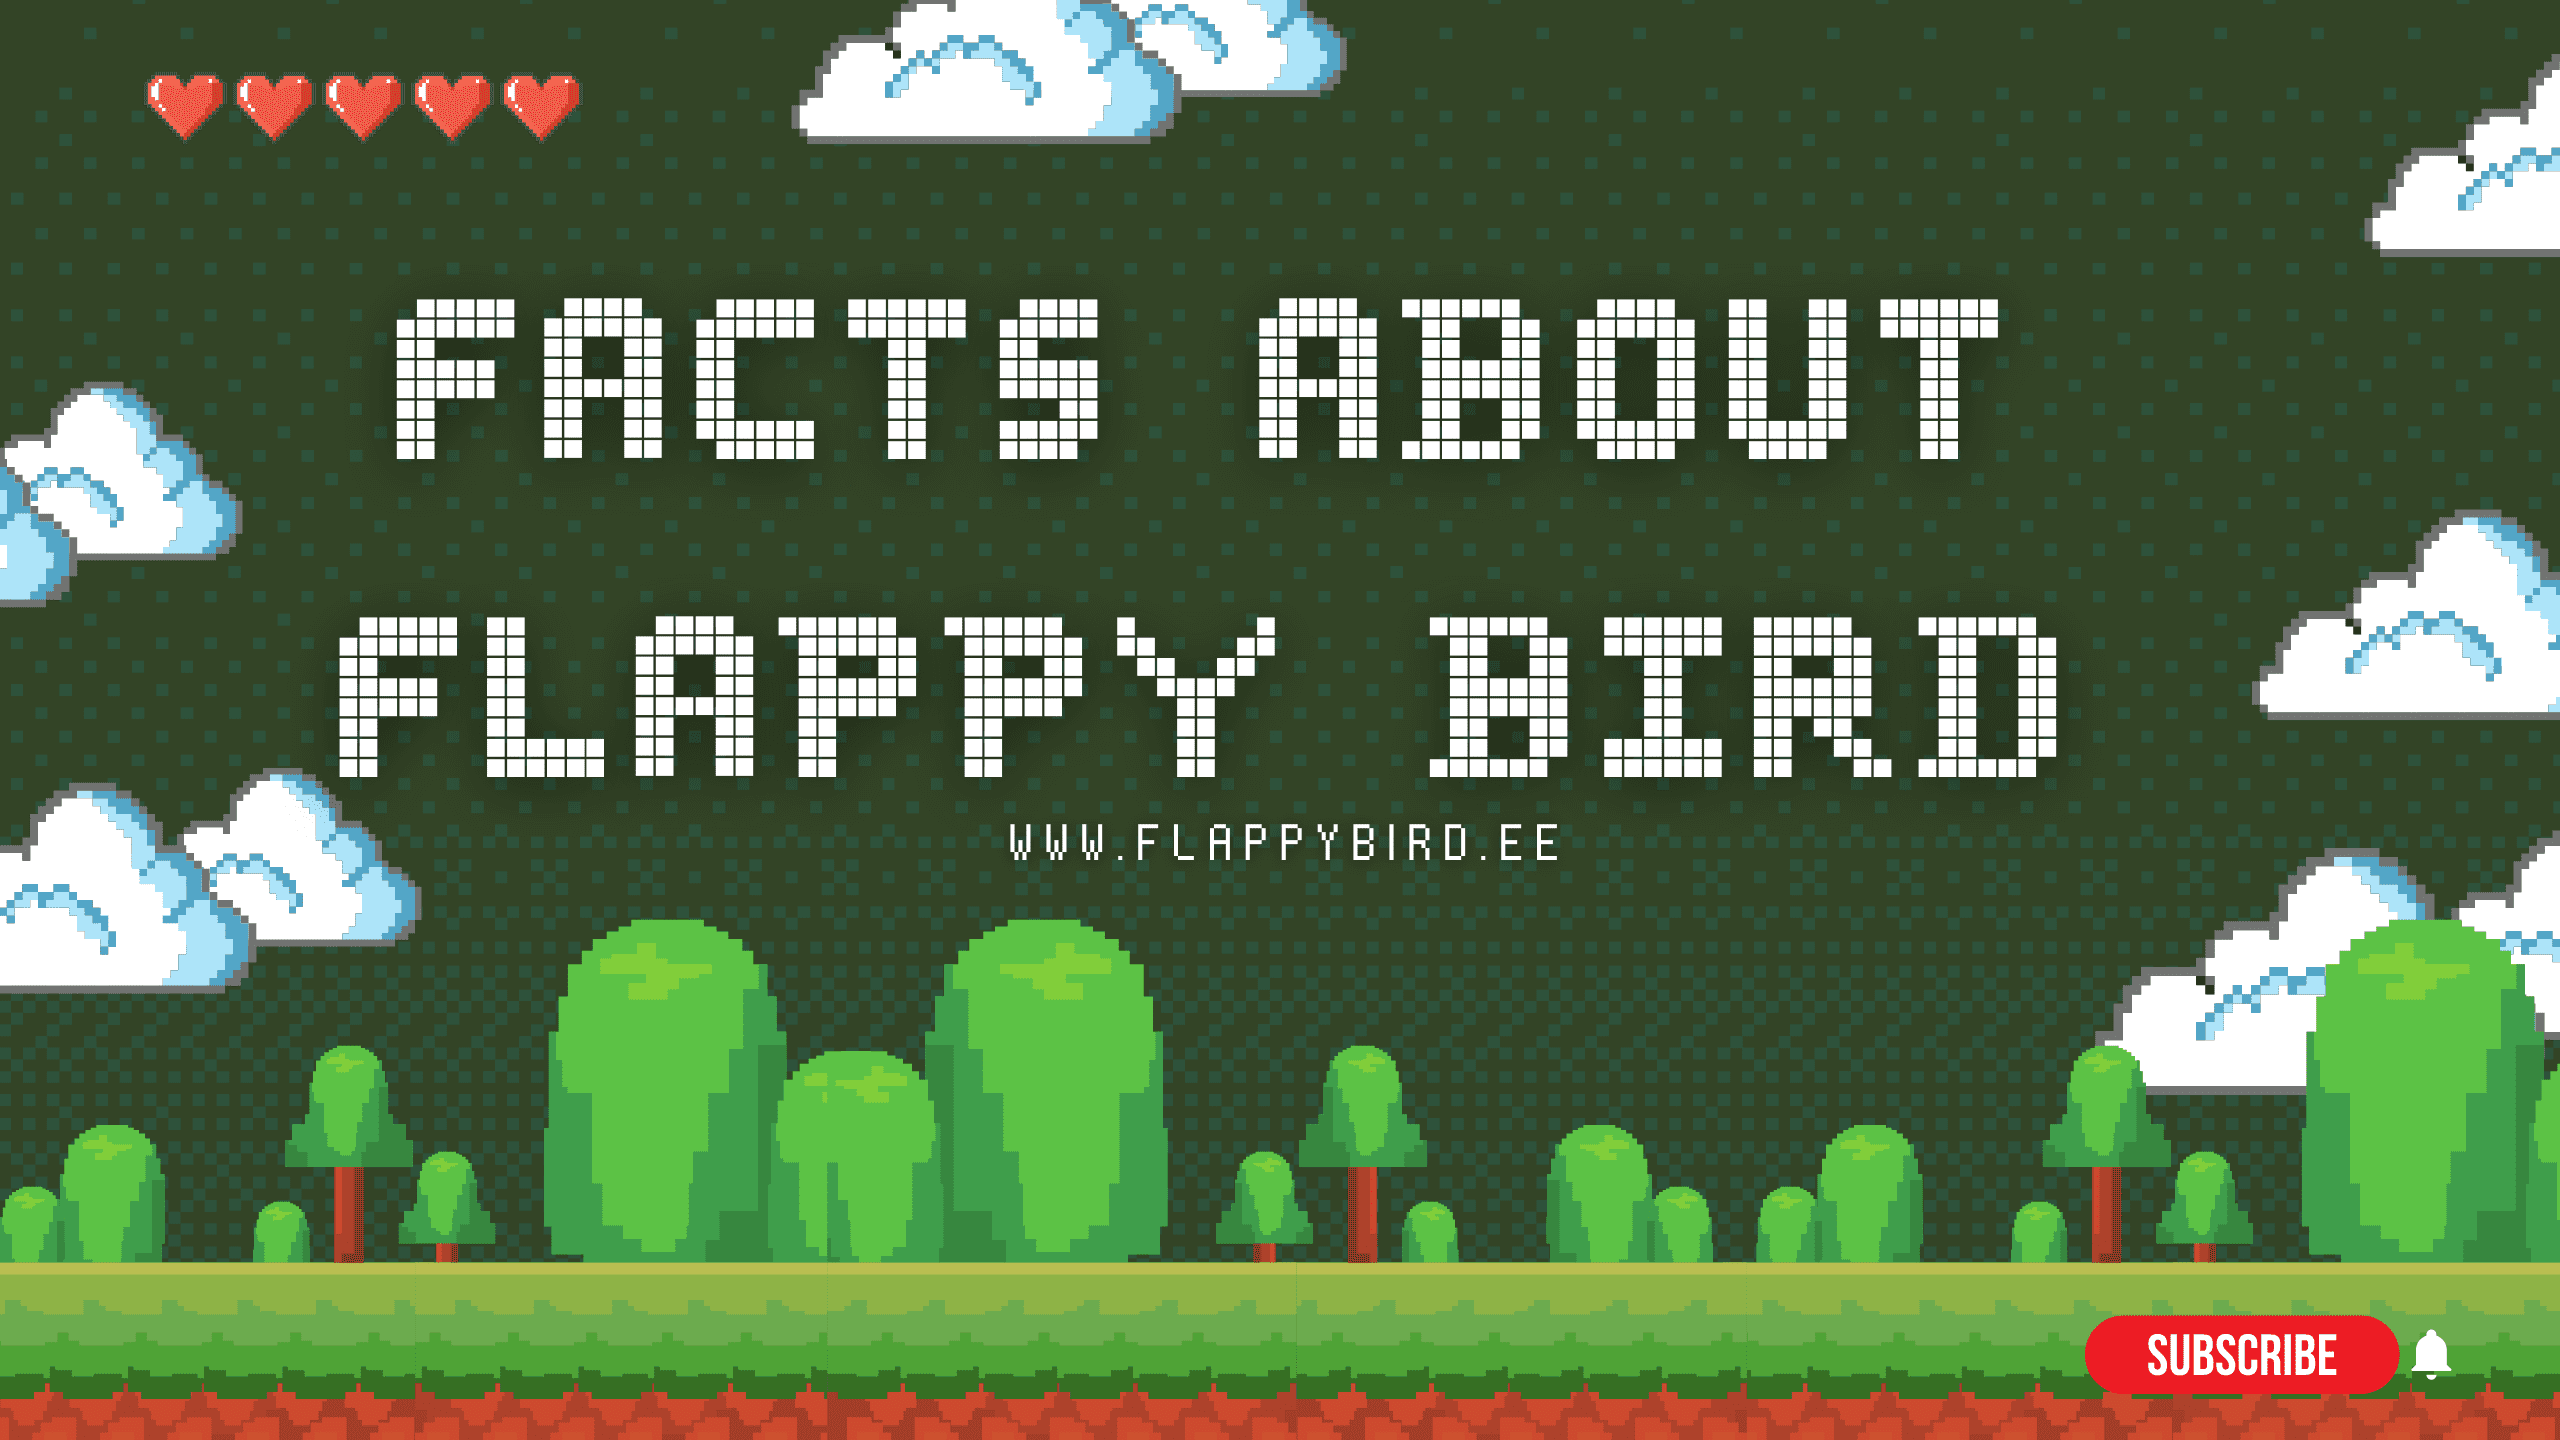 10 Facts About the Frustrating Flappy Bird Game - The Fact Site